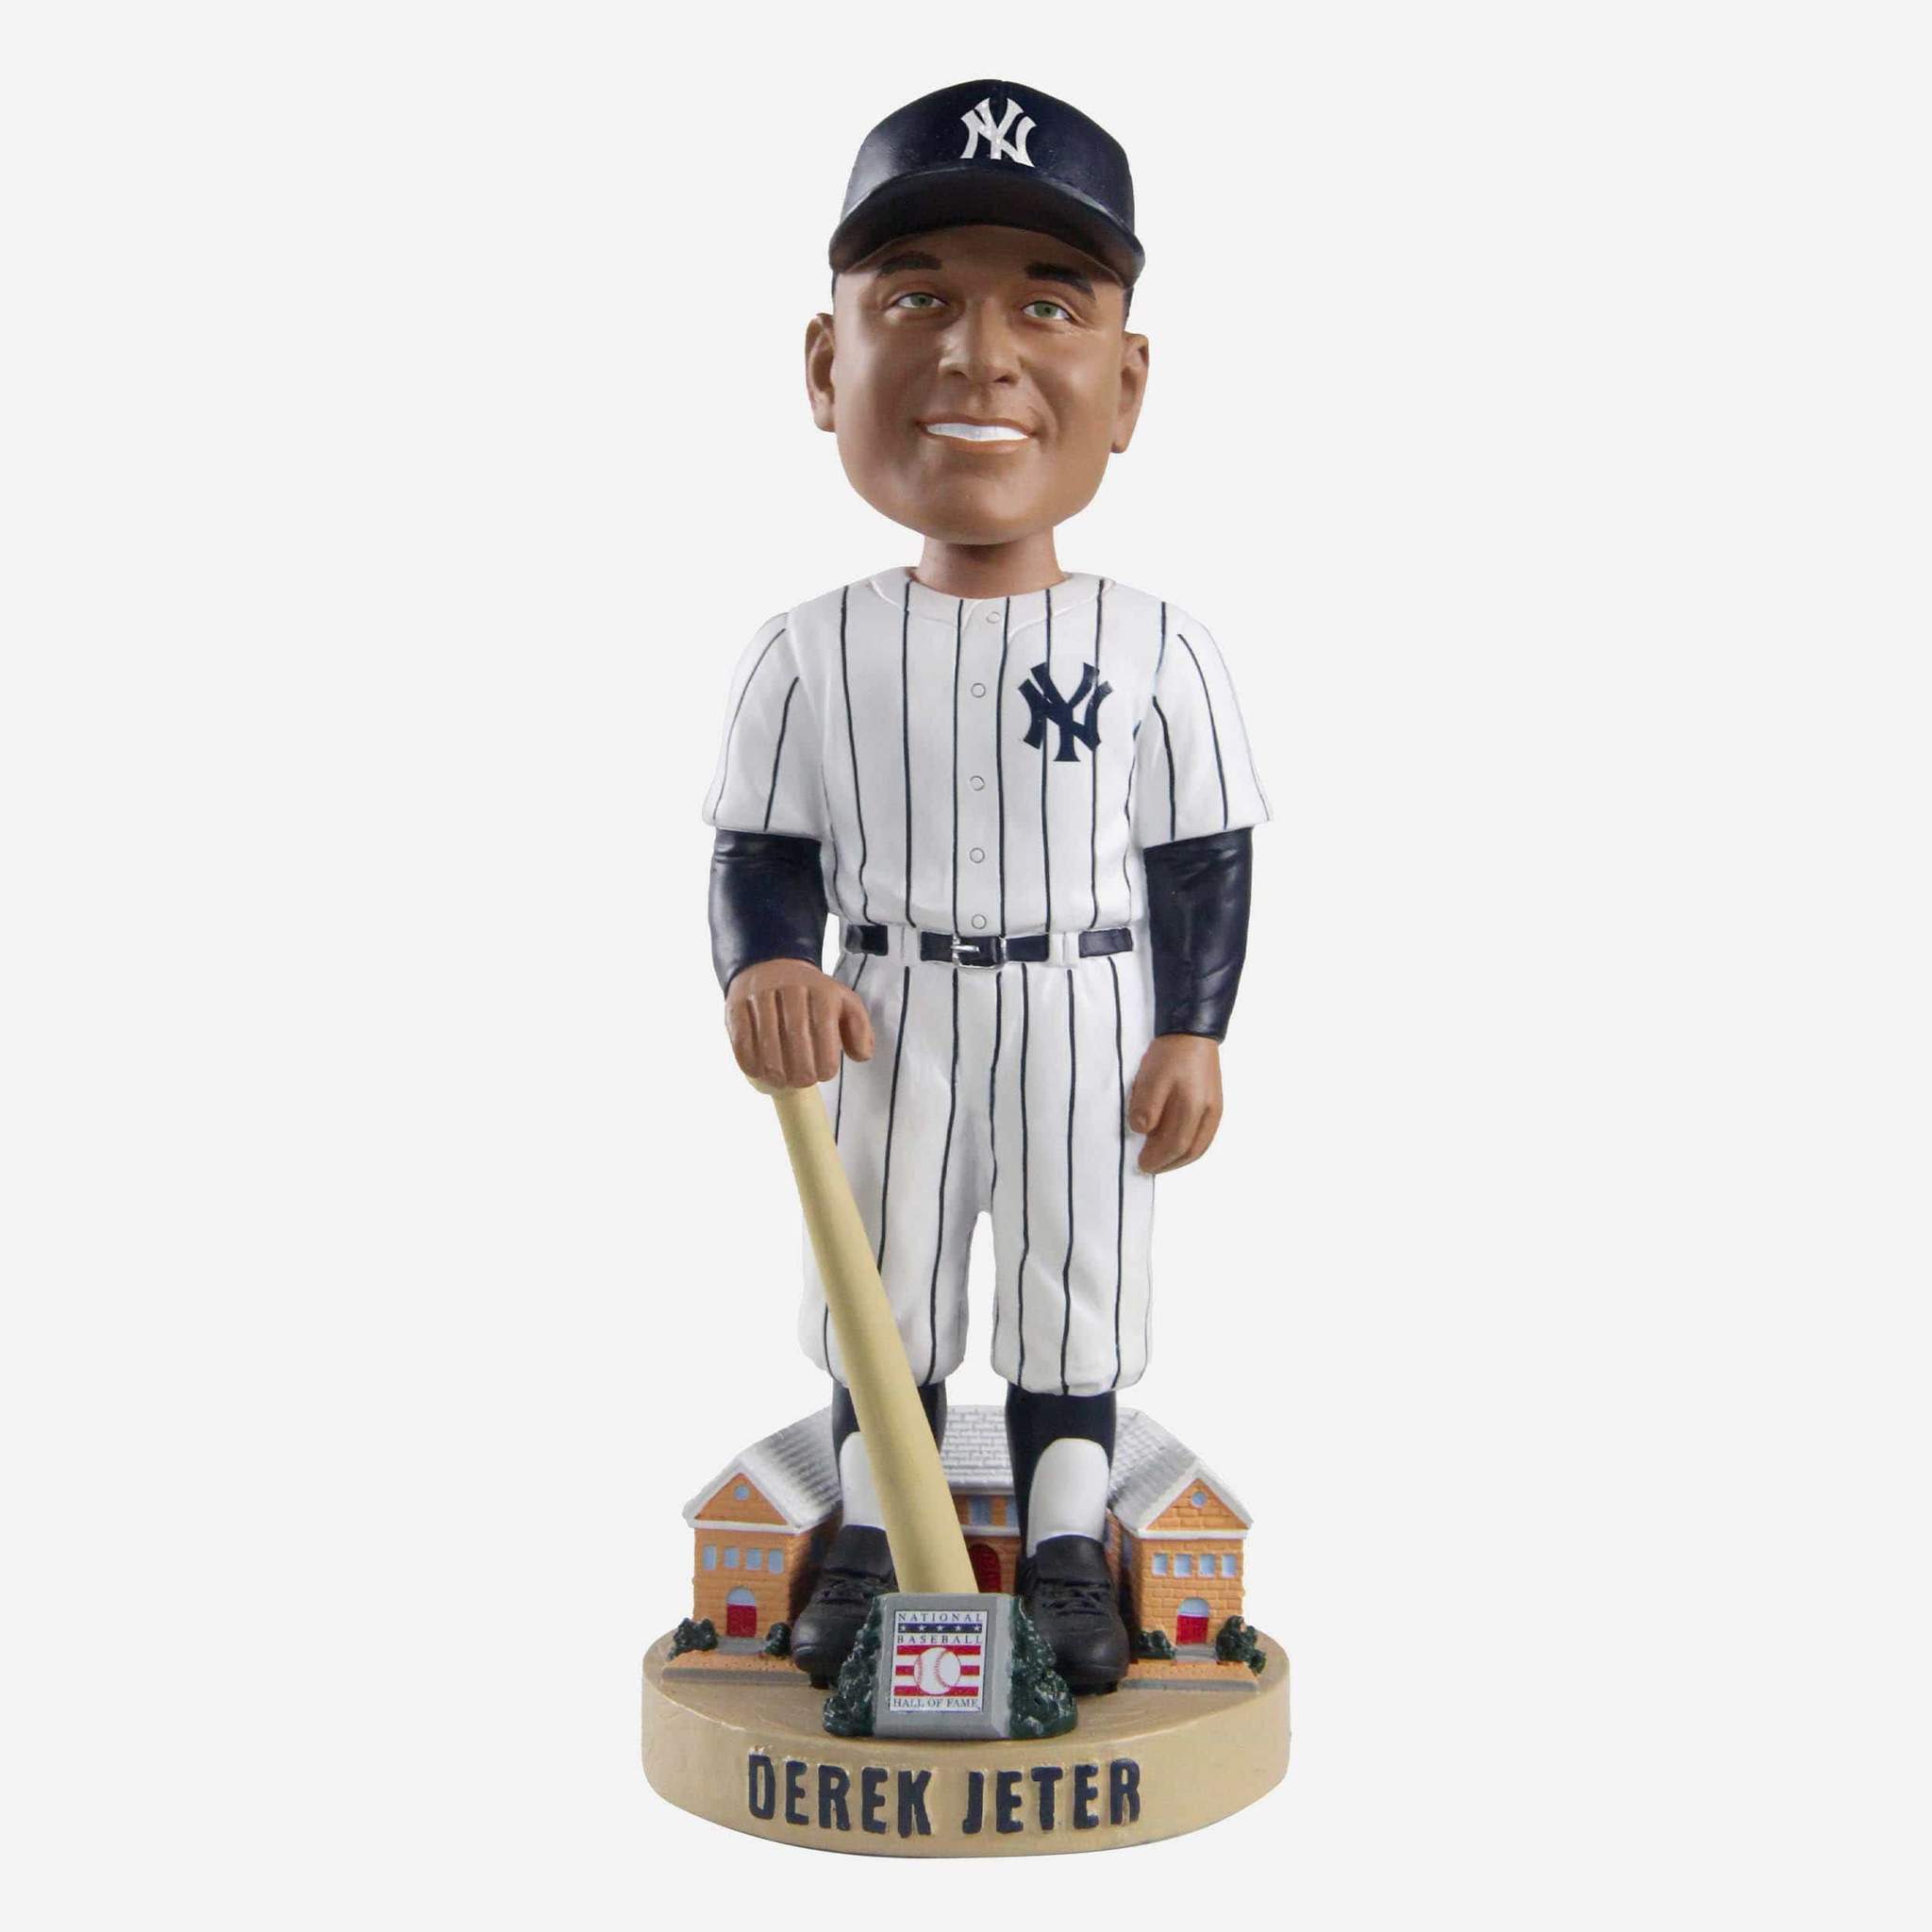 Derek Jeter Hall of Fame collection auction